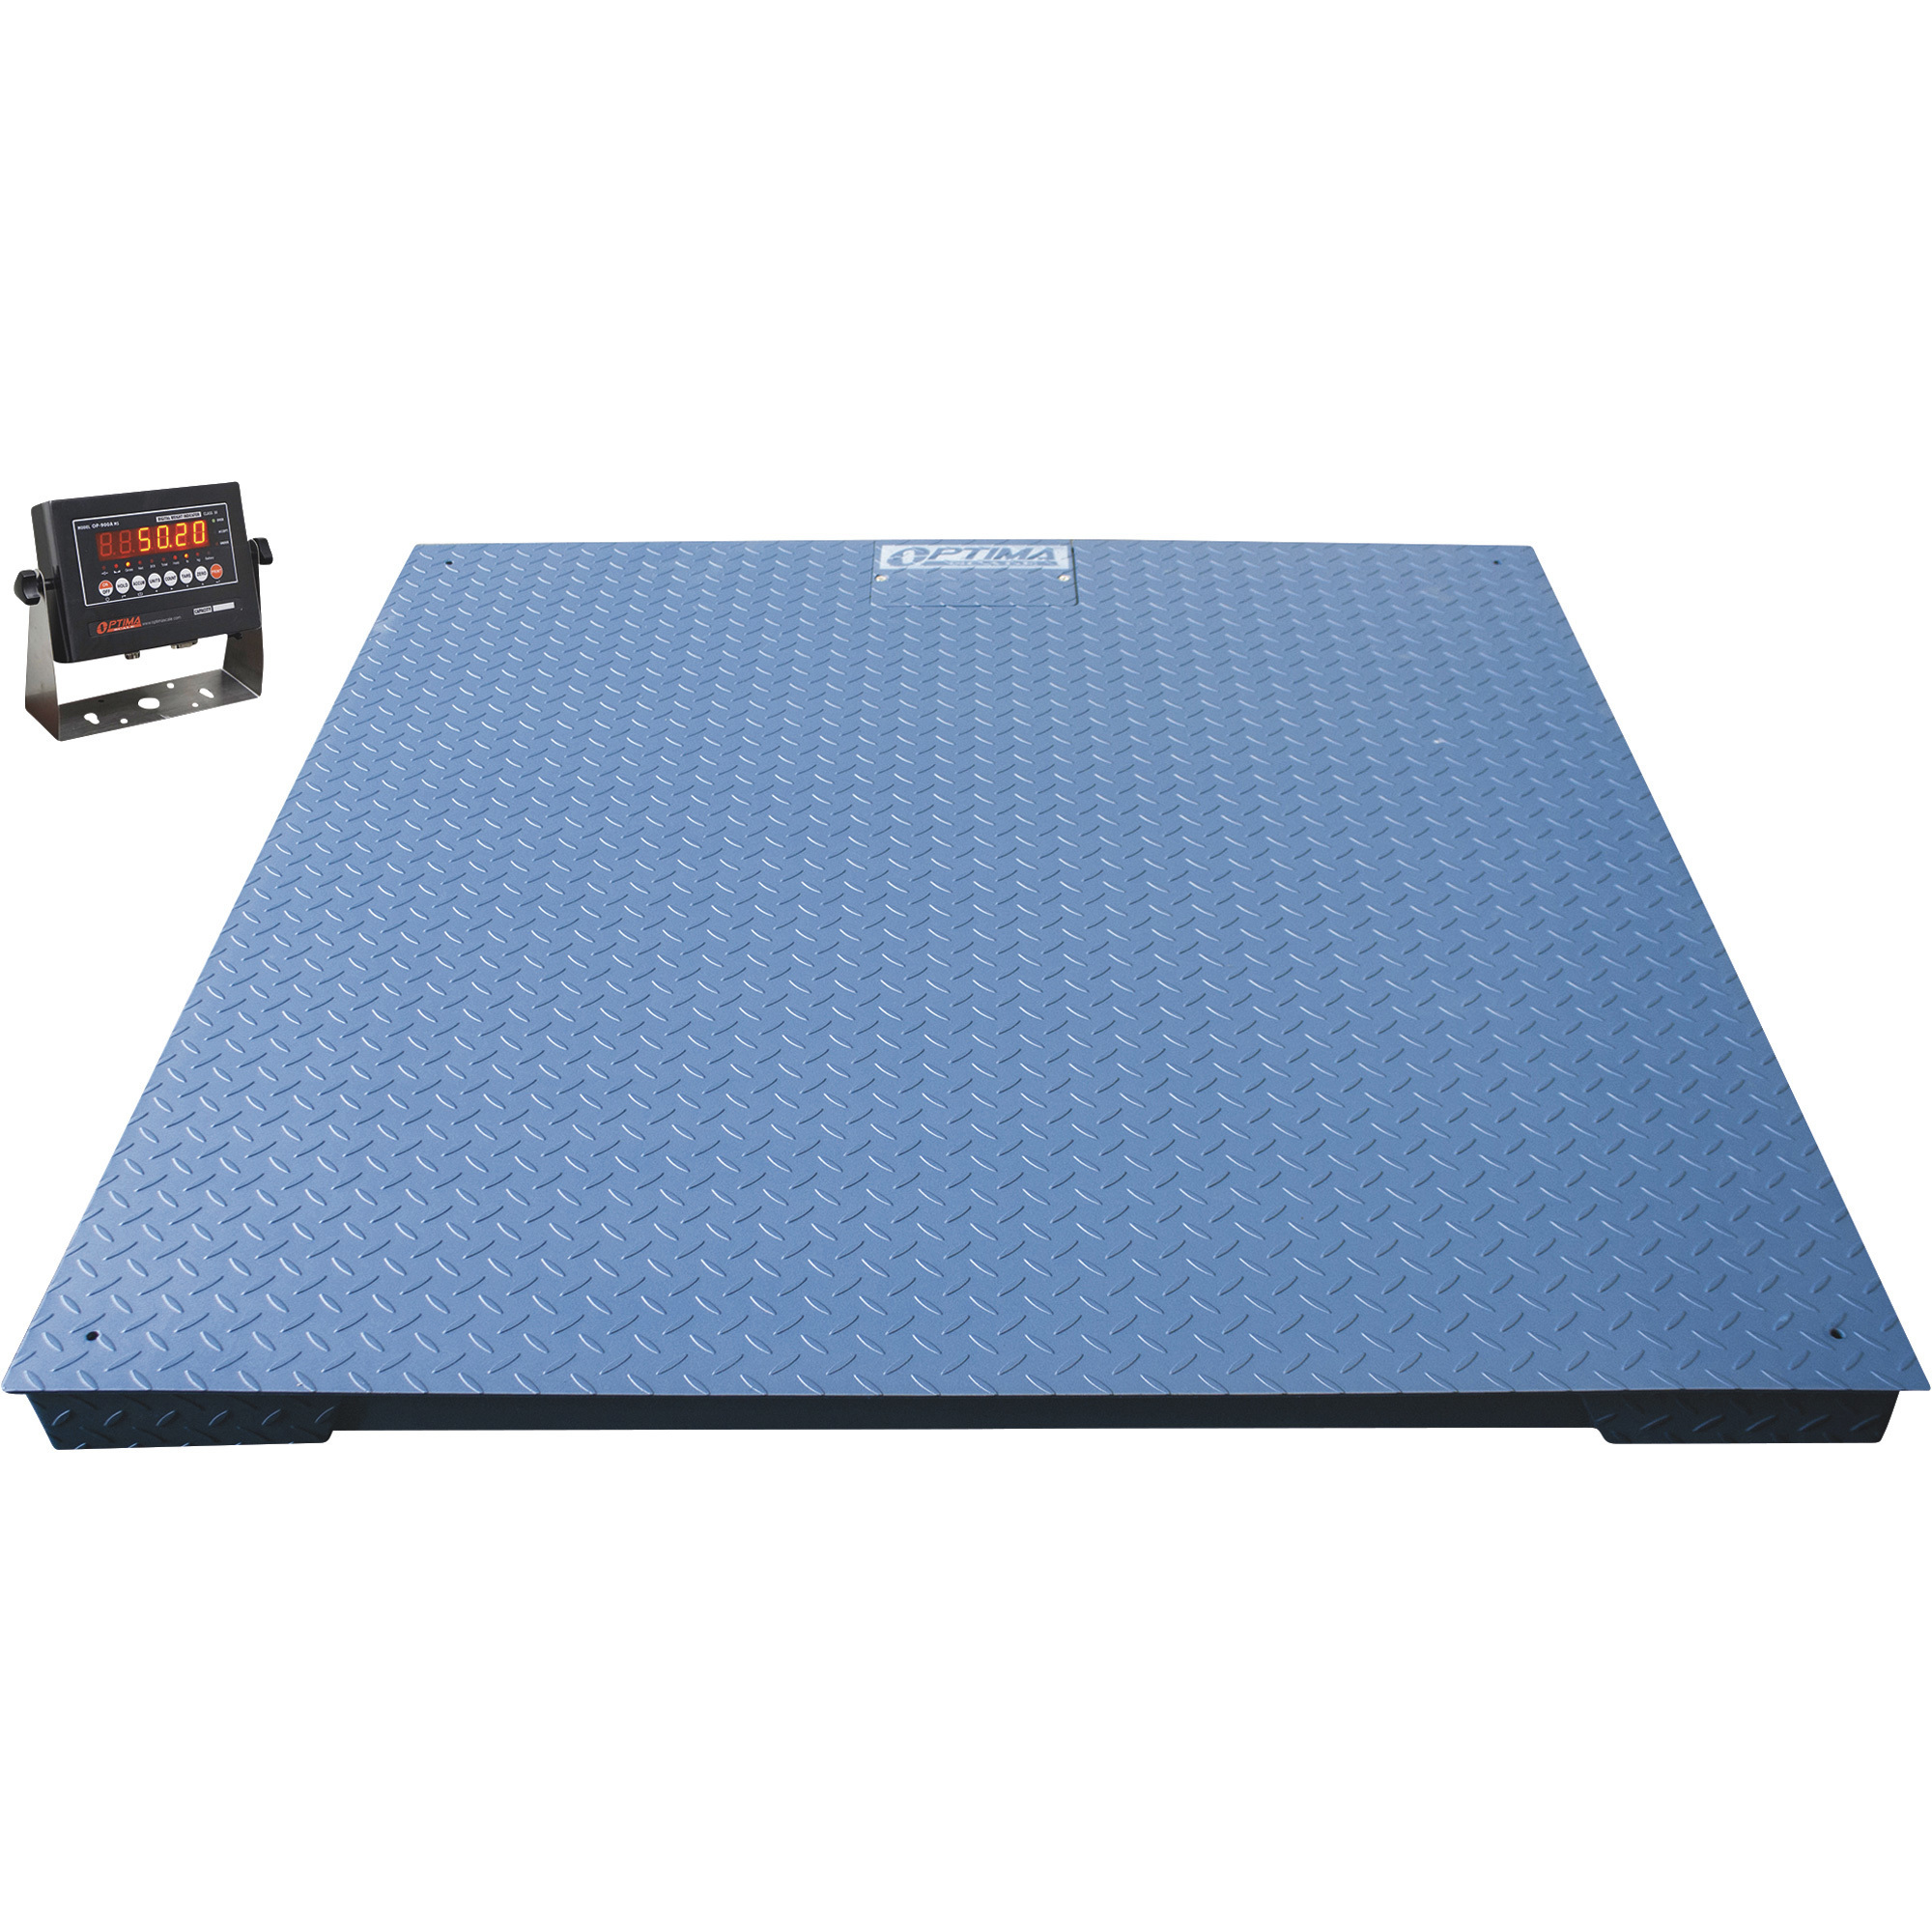 Optima Scale 48Inch x 48Inch Industrial Floor Scale — 10,000-Lb. Weight Capacity, 2-lb. Display Increments, Model OP-916-4X4-10K -  OptimaScale